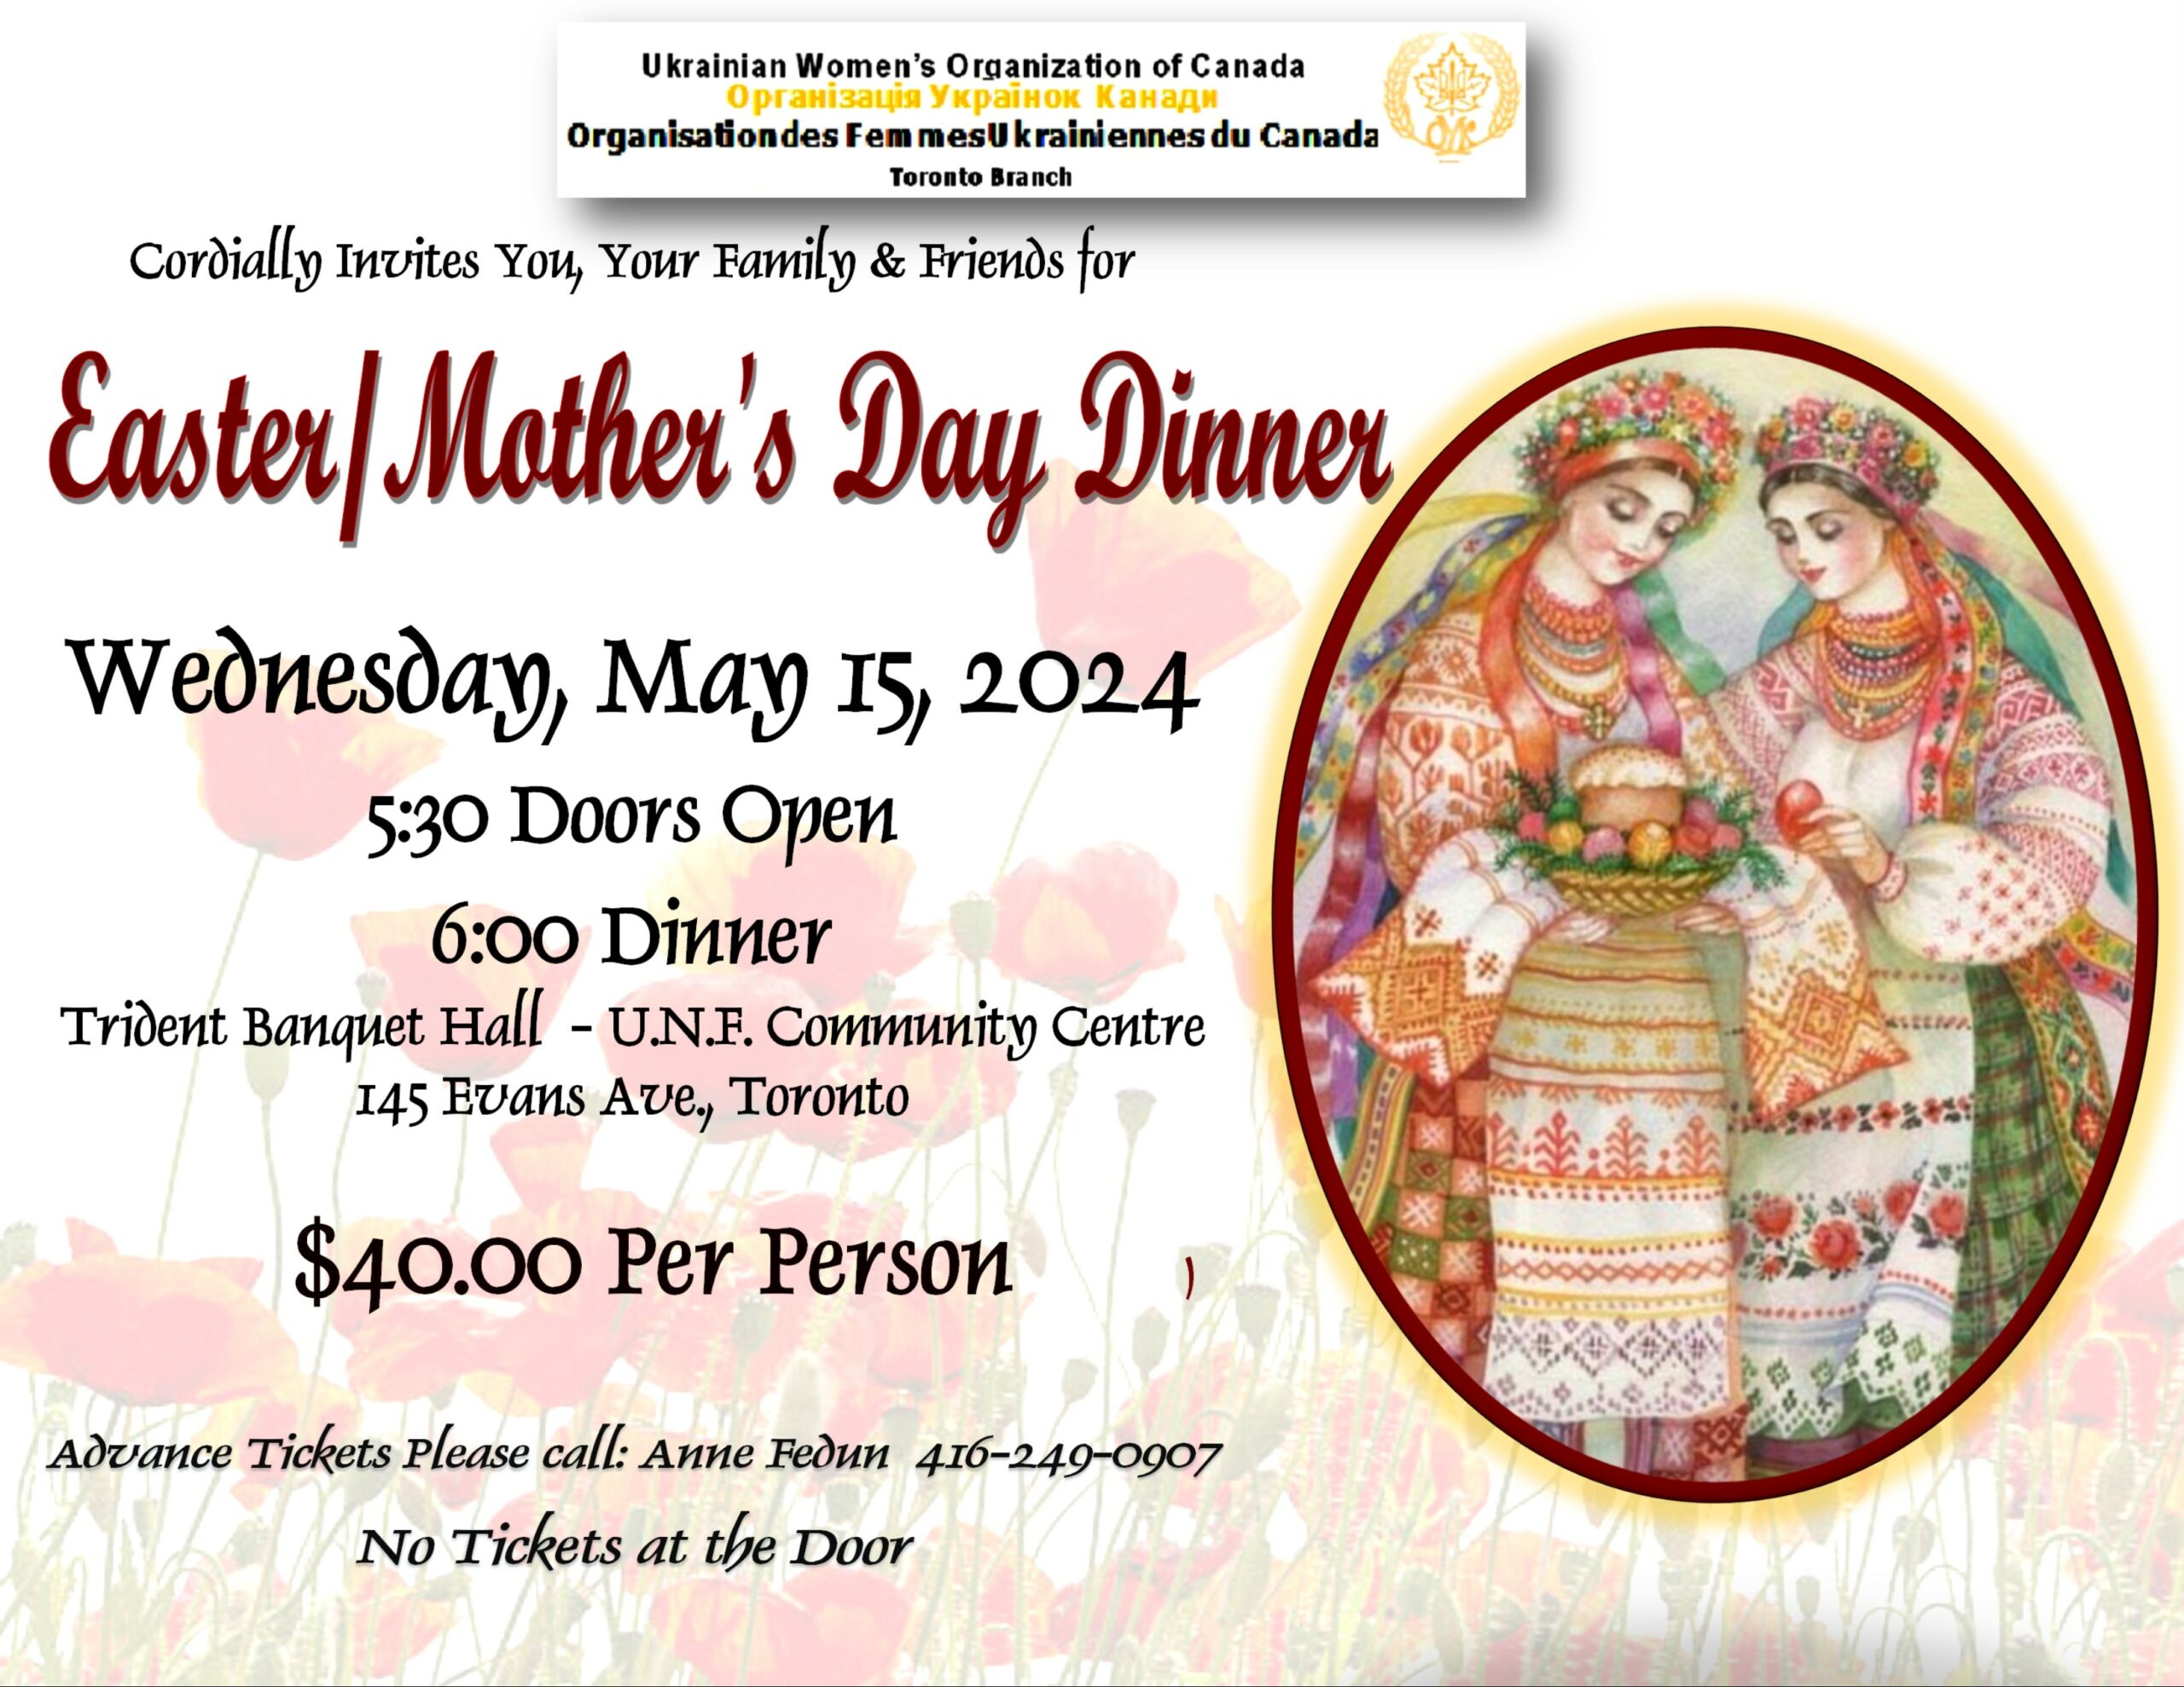 Easter Mothers Day Dinner at Trident Banquet Hall May 15 2024